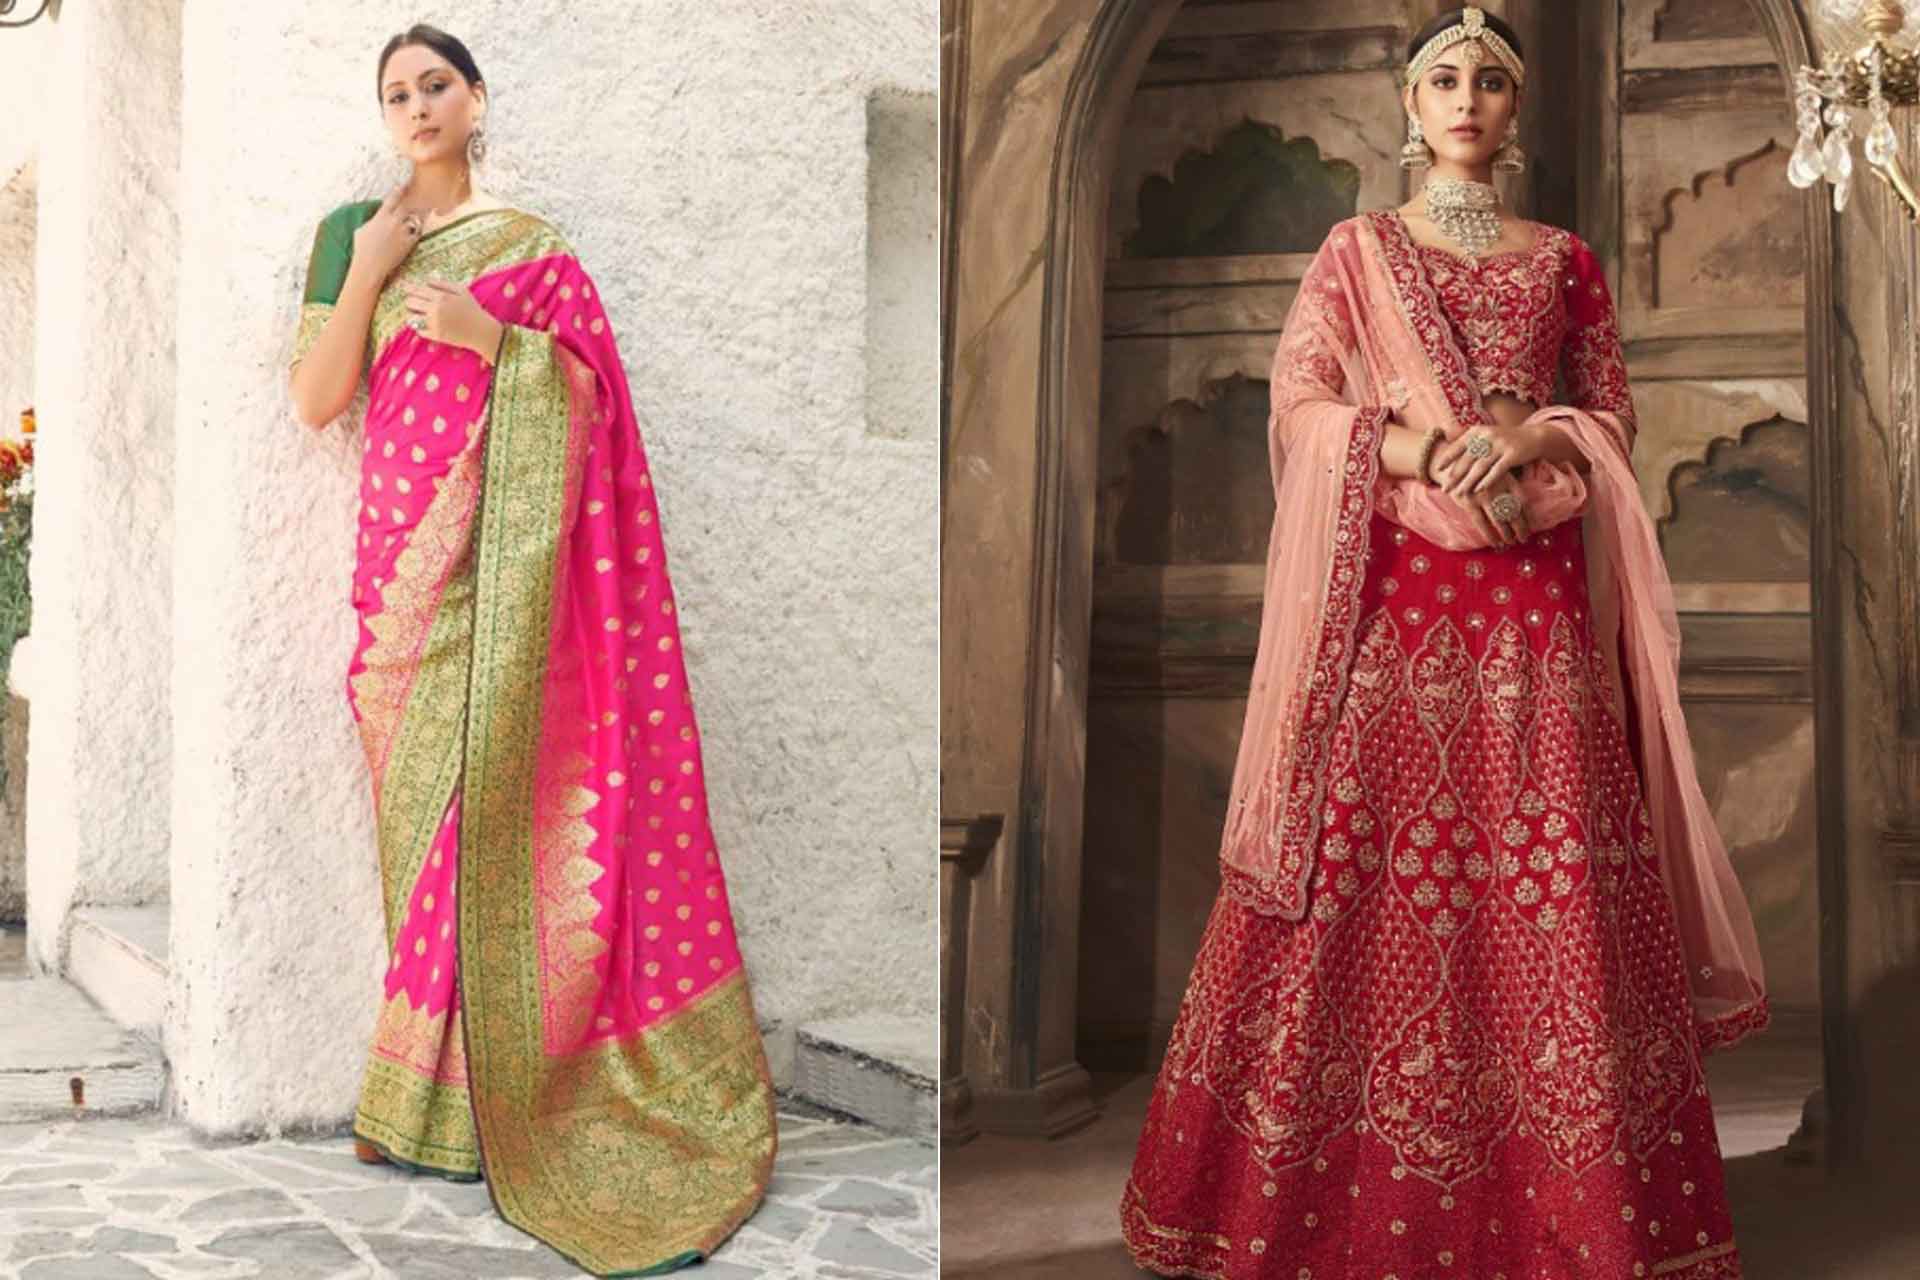 Difference Between a Saree and a Lehenga